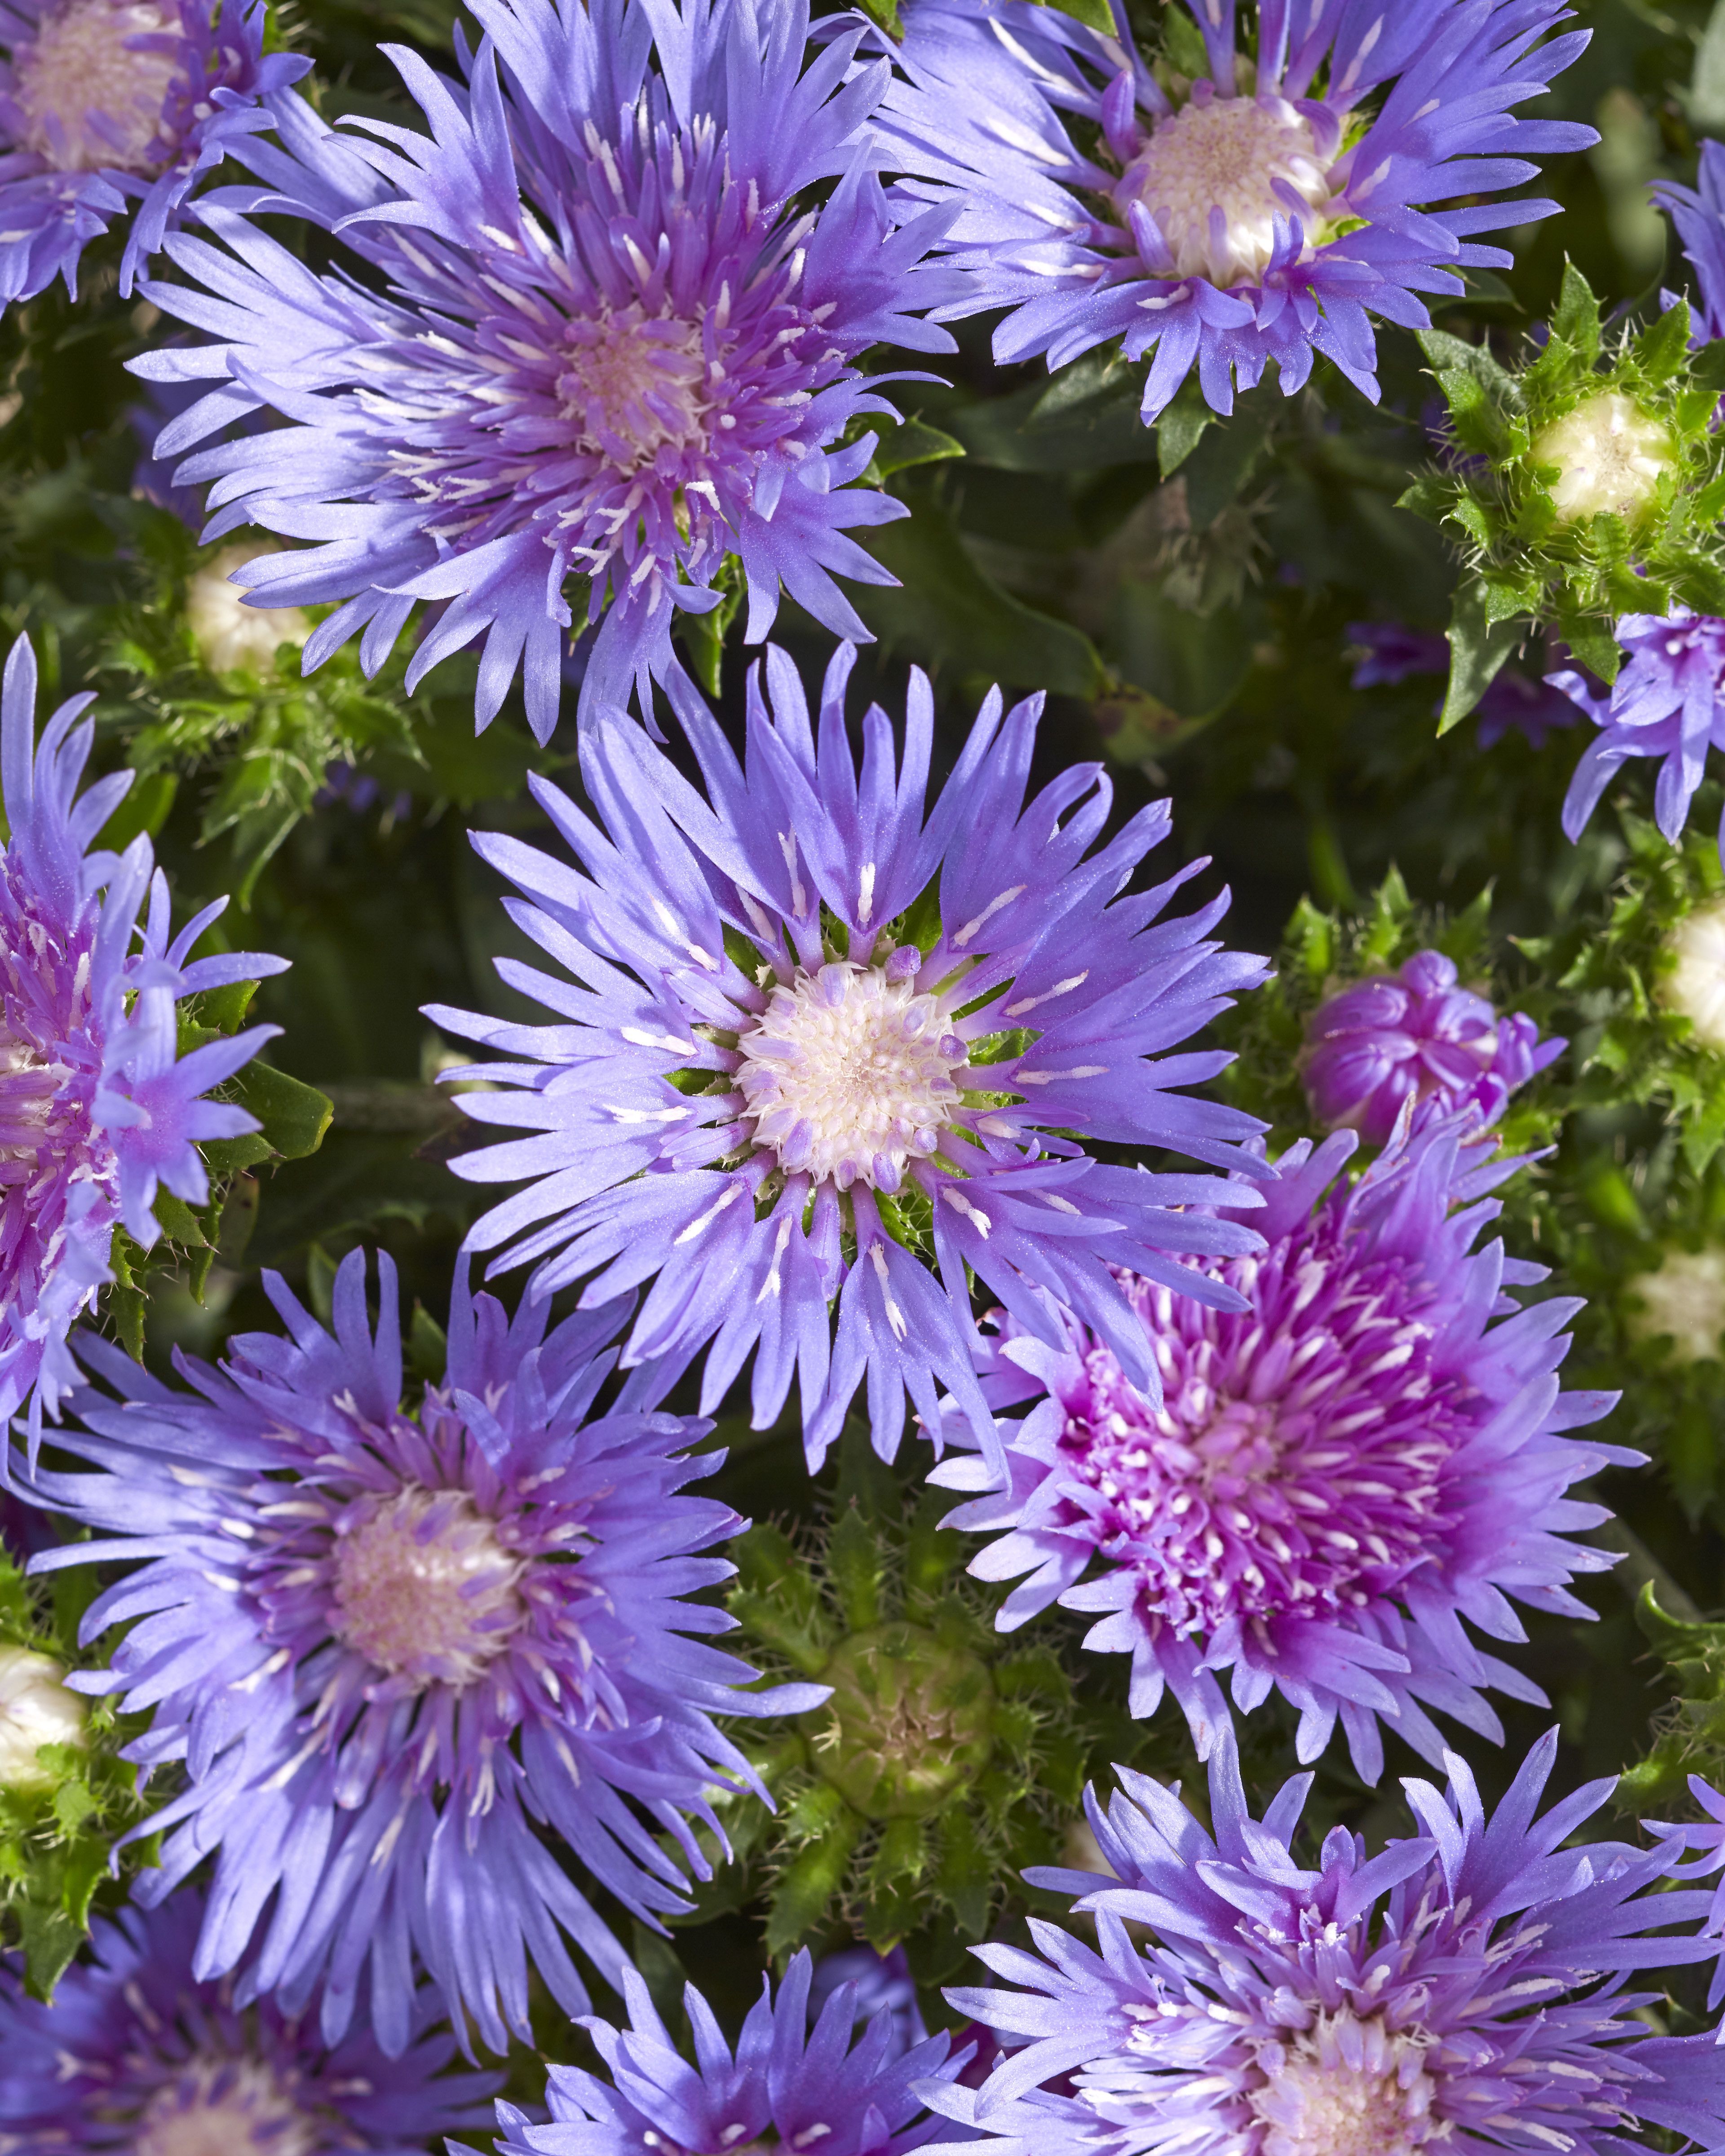 images/plants/stokesia/sto-mels-blue/sto-mels-blue-0011.jpg